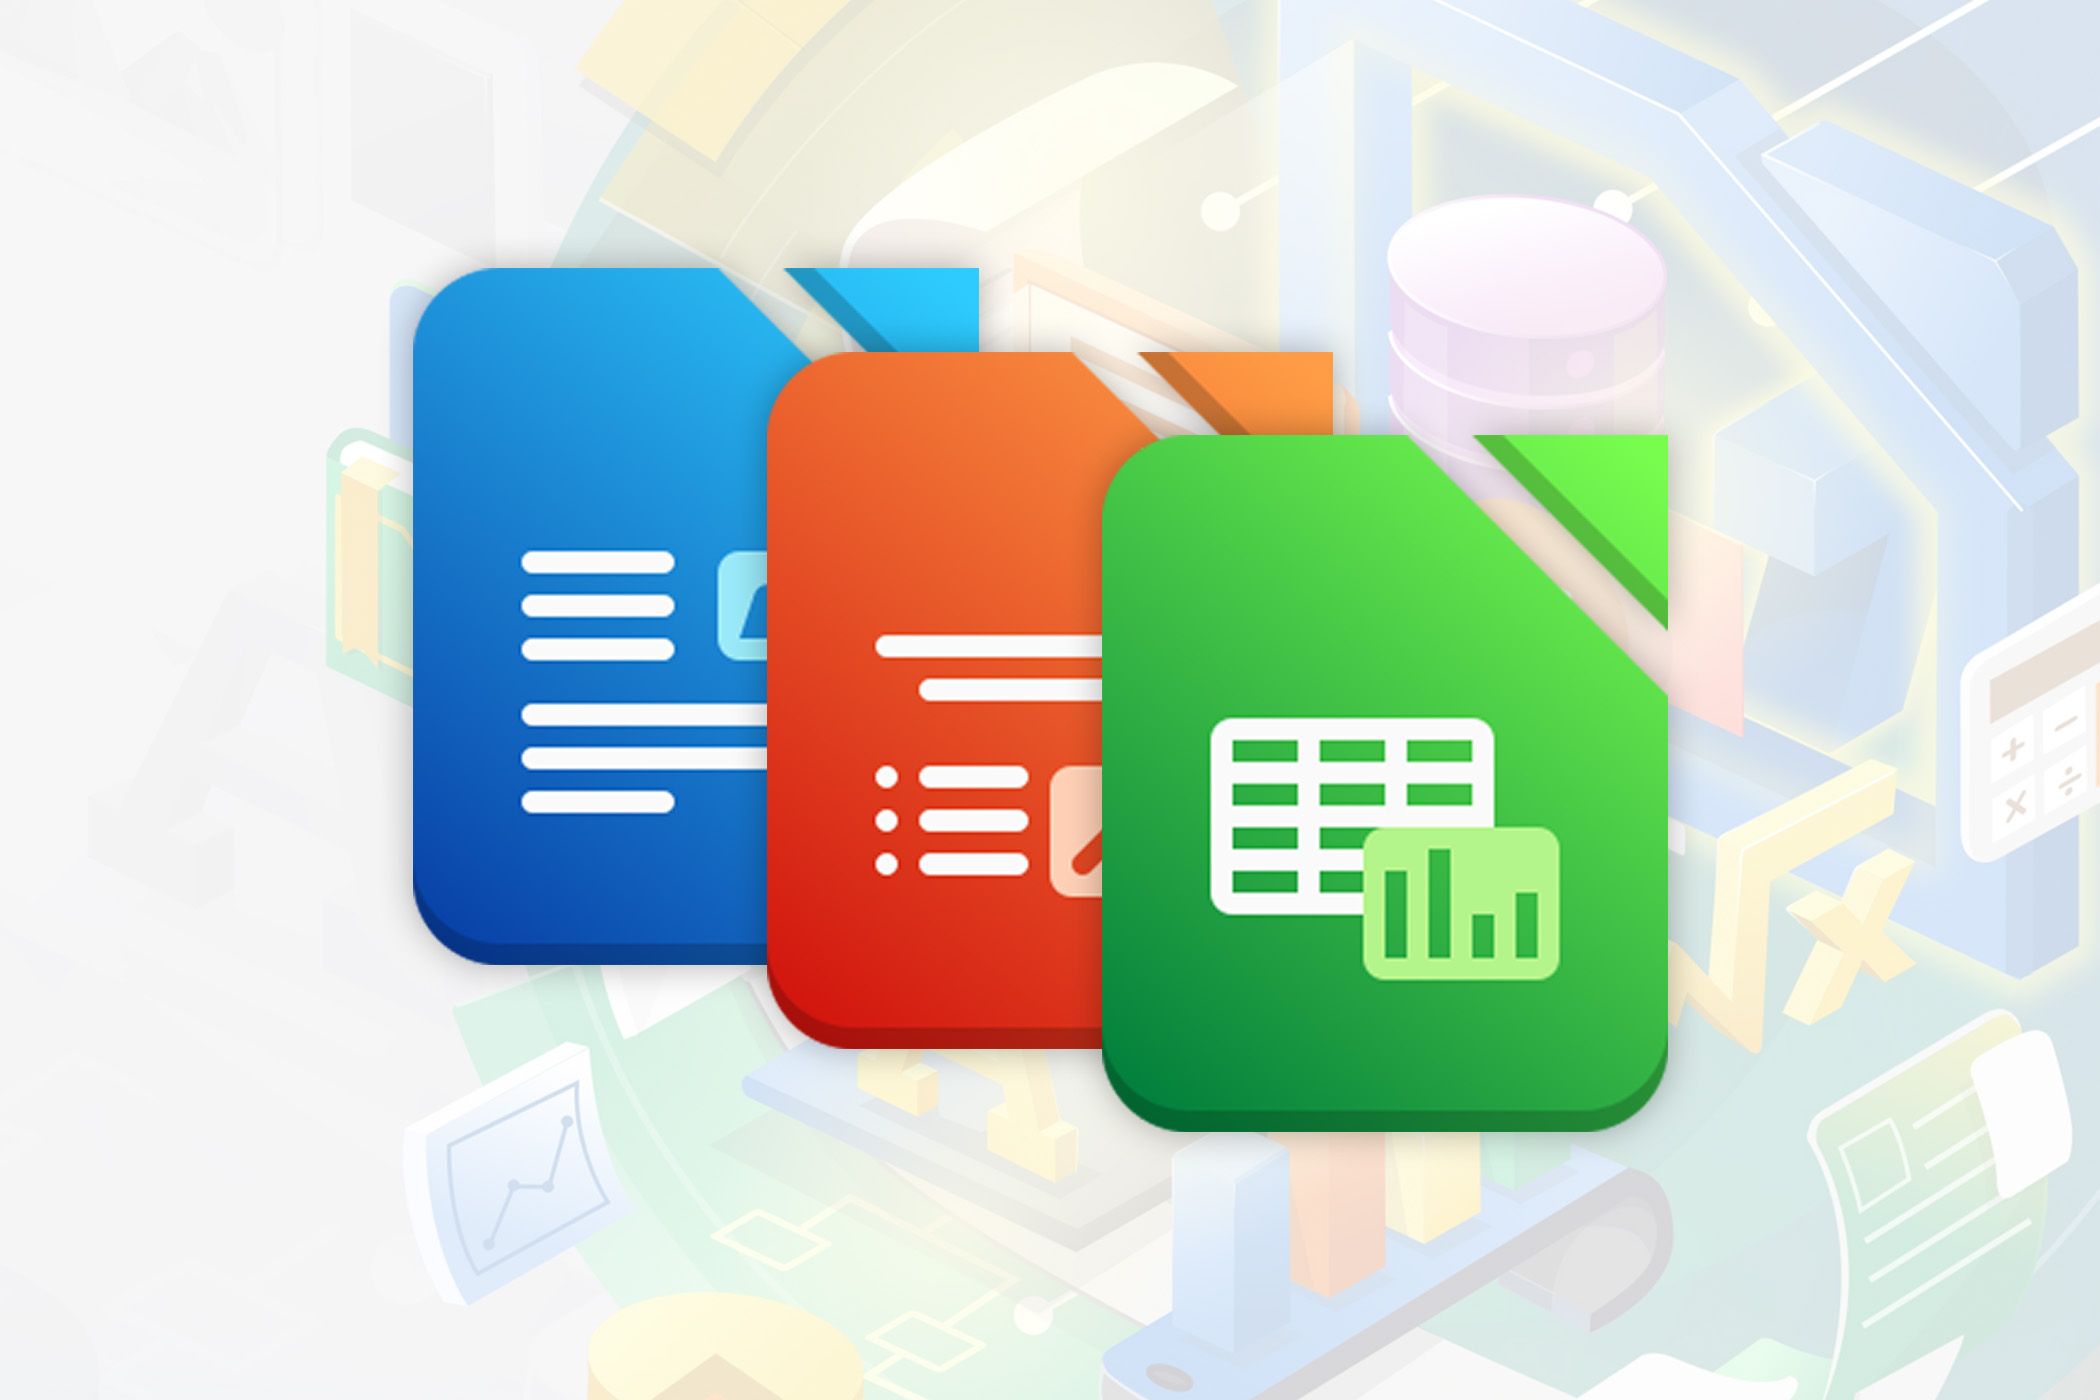 LibreOffice icons for Writer, Calc, and Impress